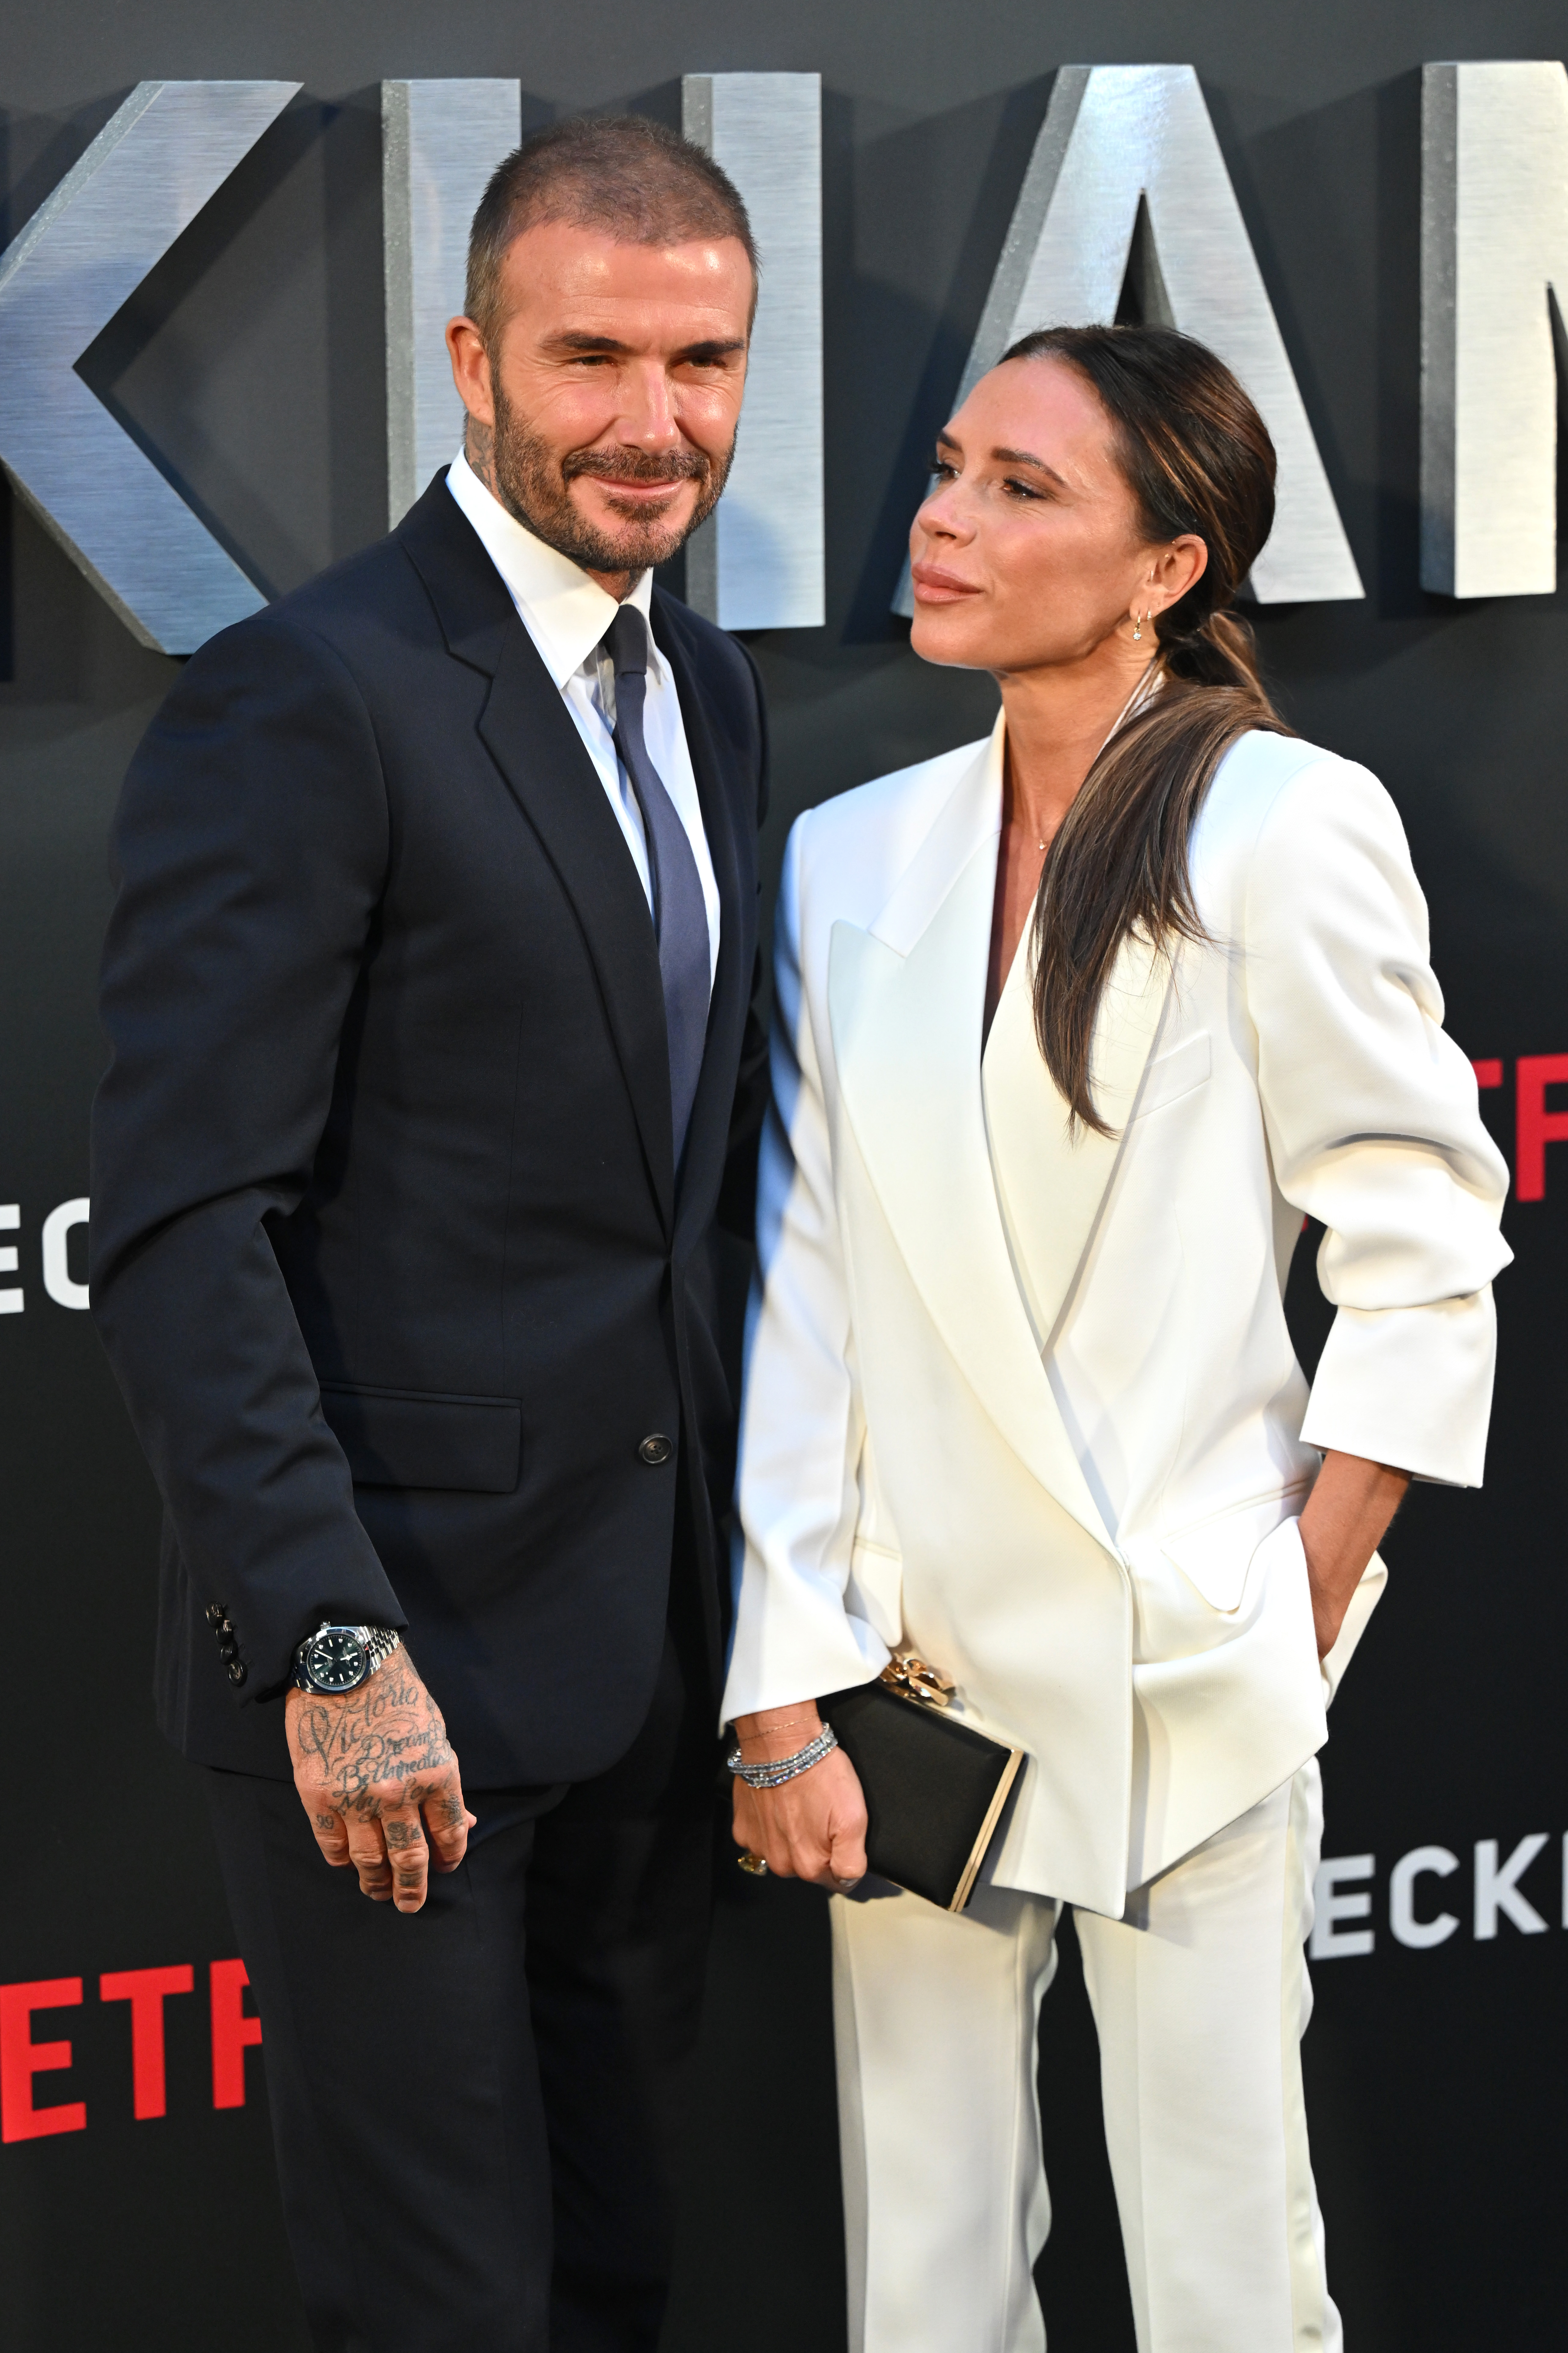 David Beckham and Victoria Beckham at the "Beckham" Premiere in London, England on October 03, 2023 | Source: Getty Images